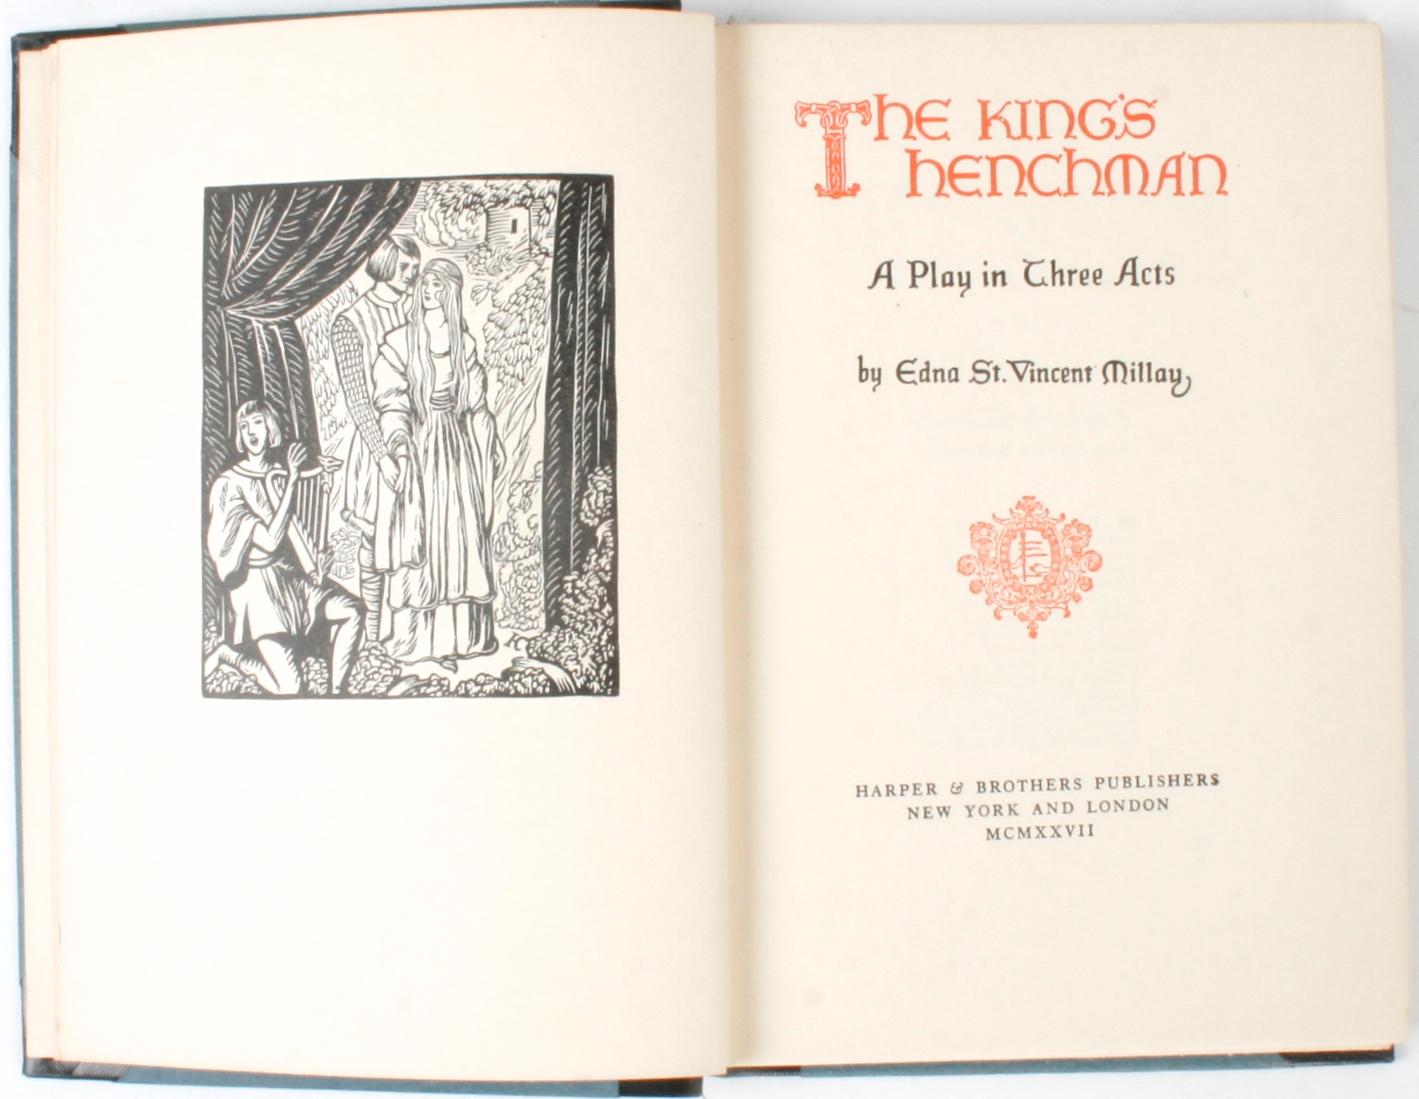 Three Books by Edna St. Vincent Millay. 1.) The King's Henchman, A Play in Three Acts by Edna St. Vincent Millay. Harper & Brothers, New York and London, 1927. (L-B date code for November 1927.) 1st Ed, 16th printing hardcover no dust jacket. She